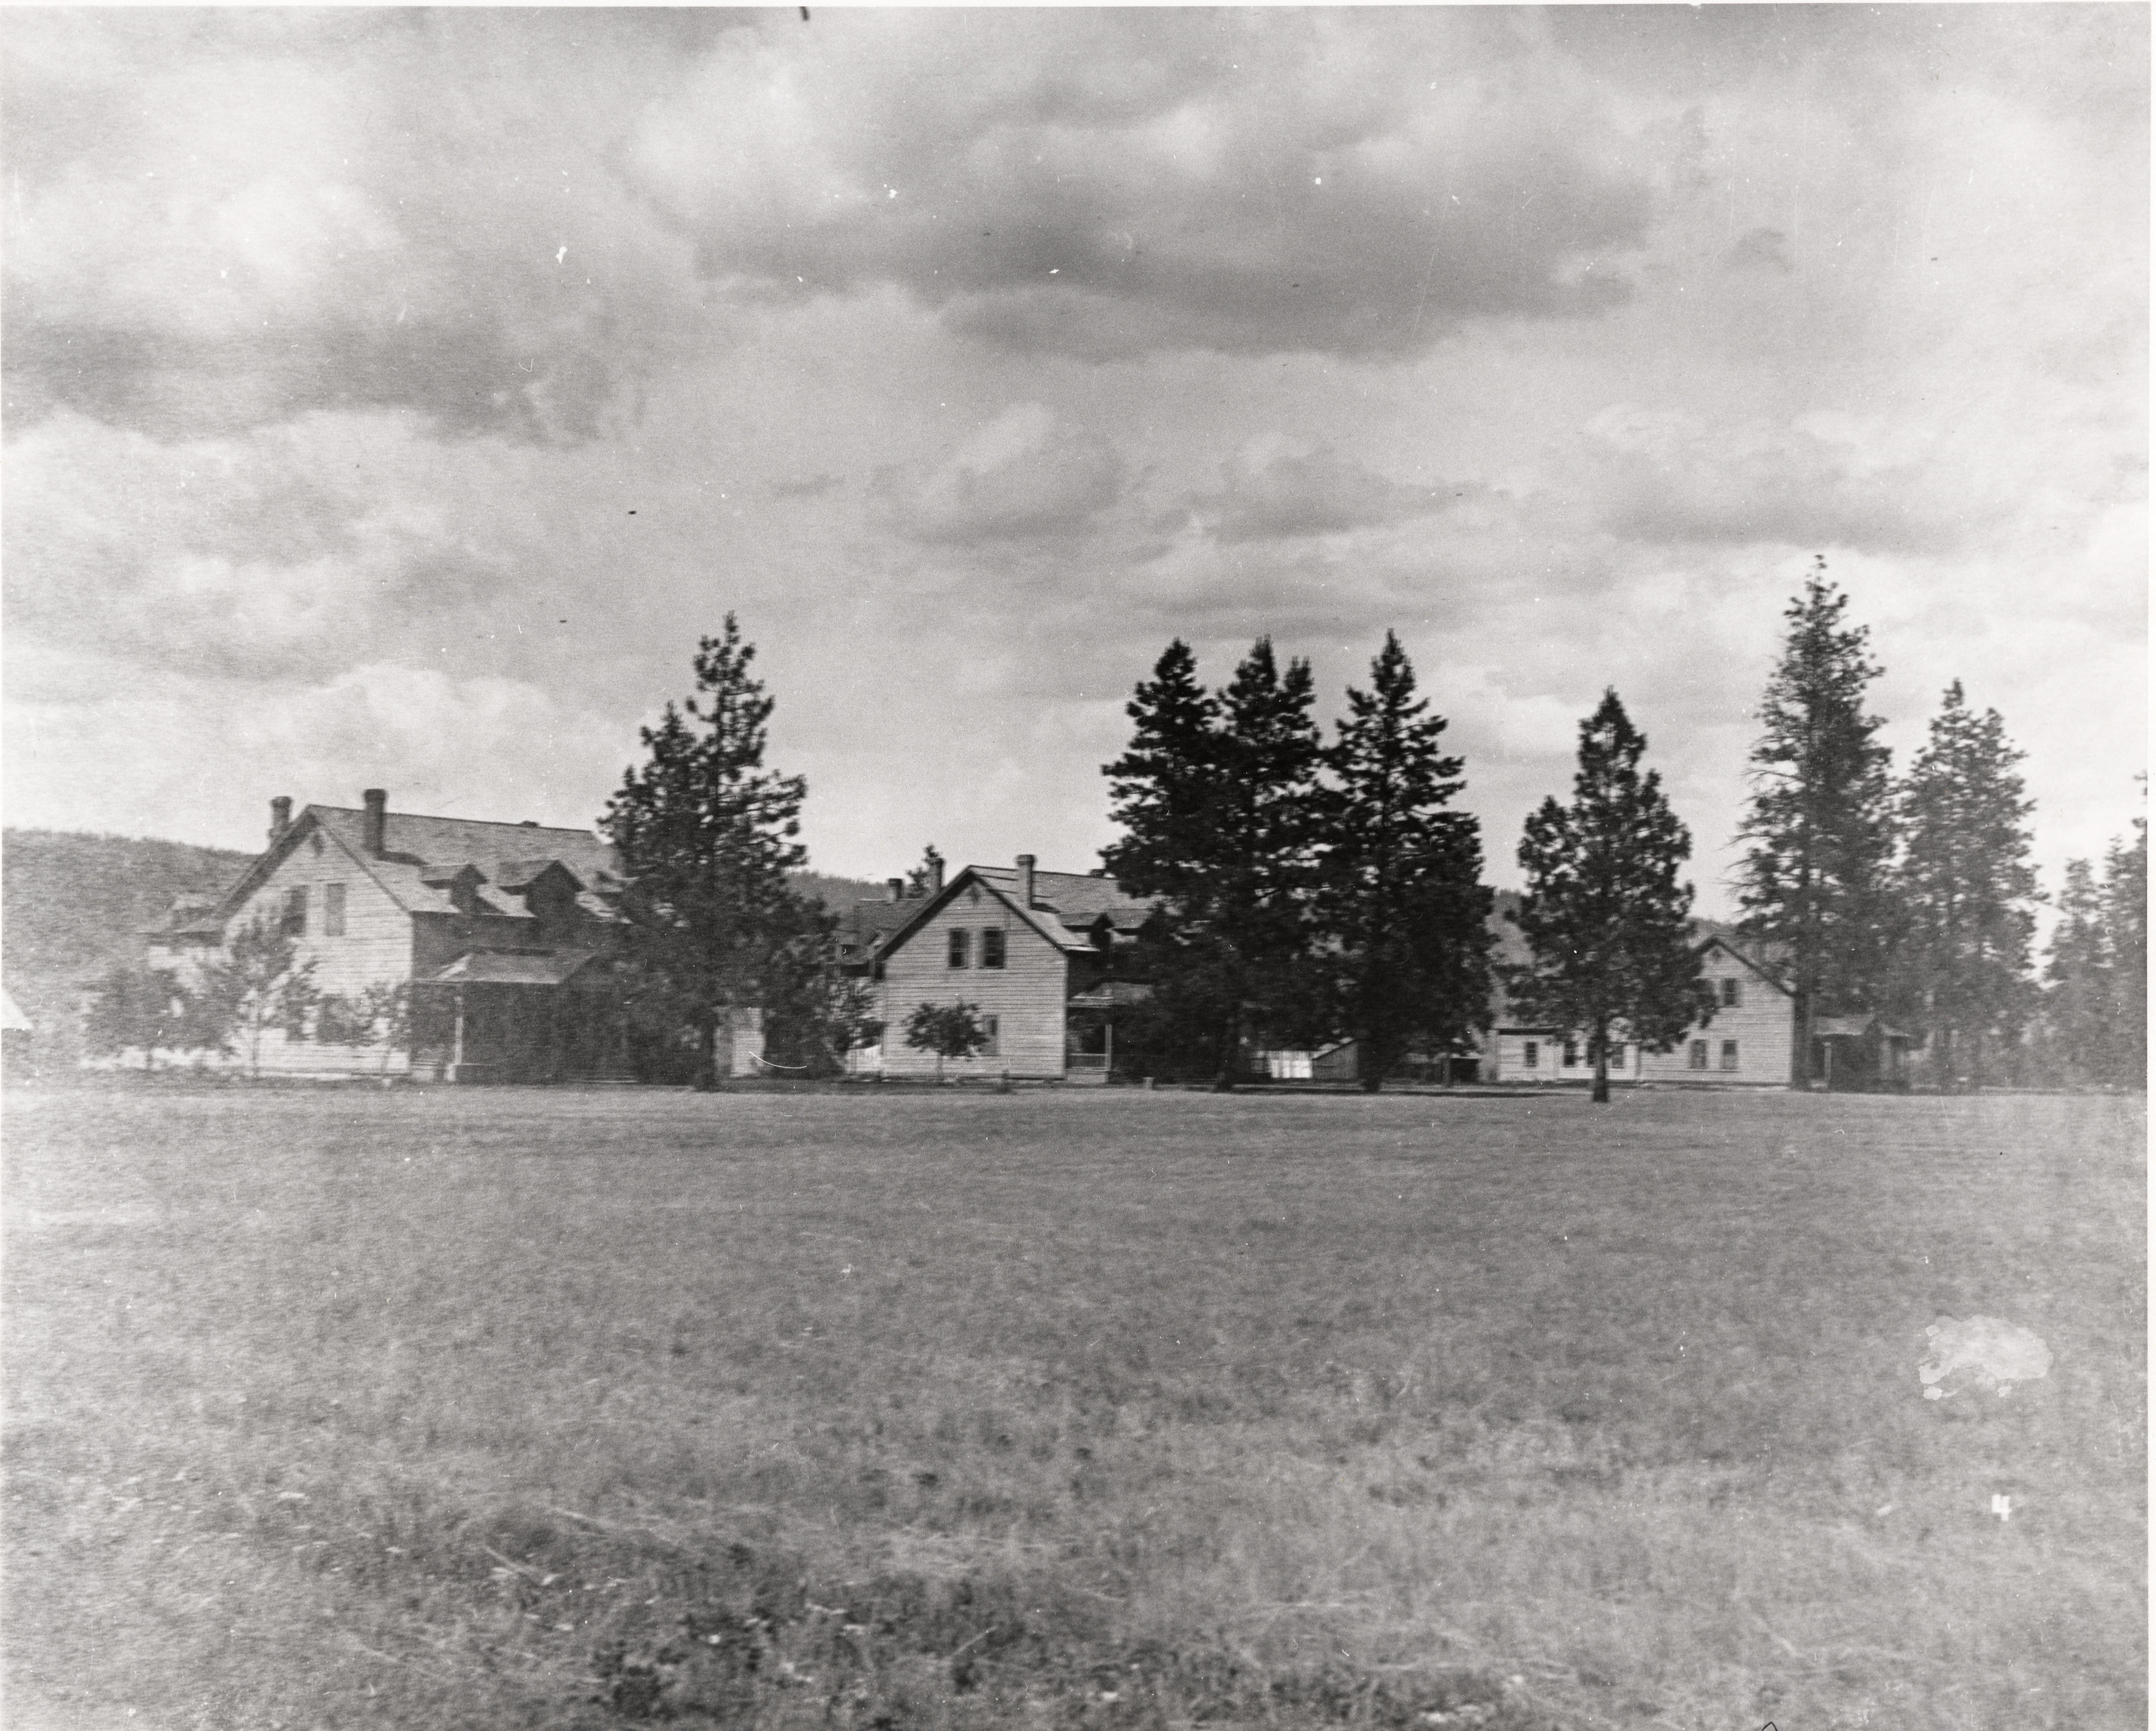 Black and white photograph of several multistory houses in a row on the edge of a clearing